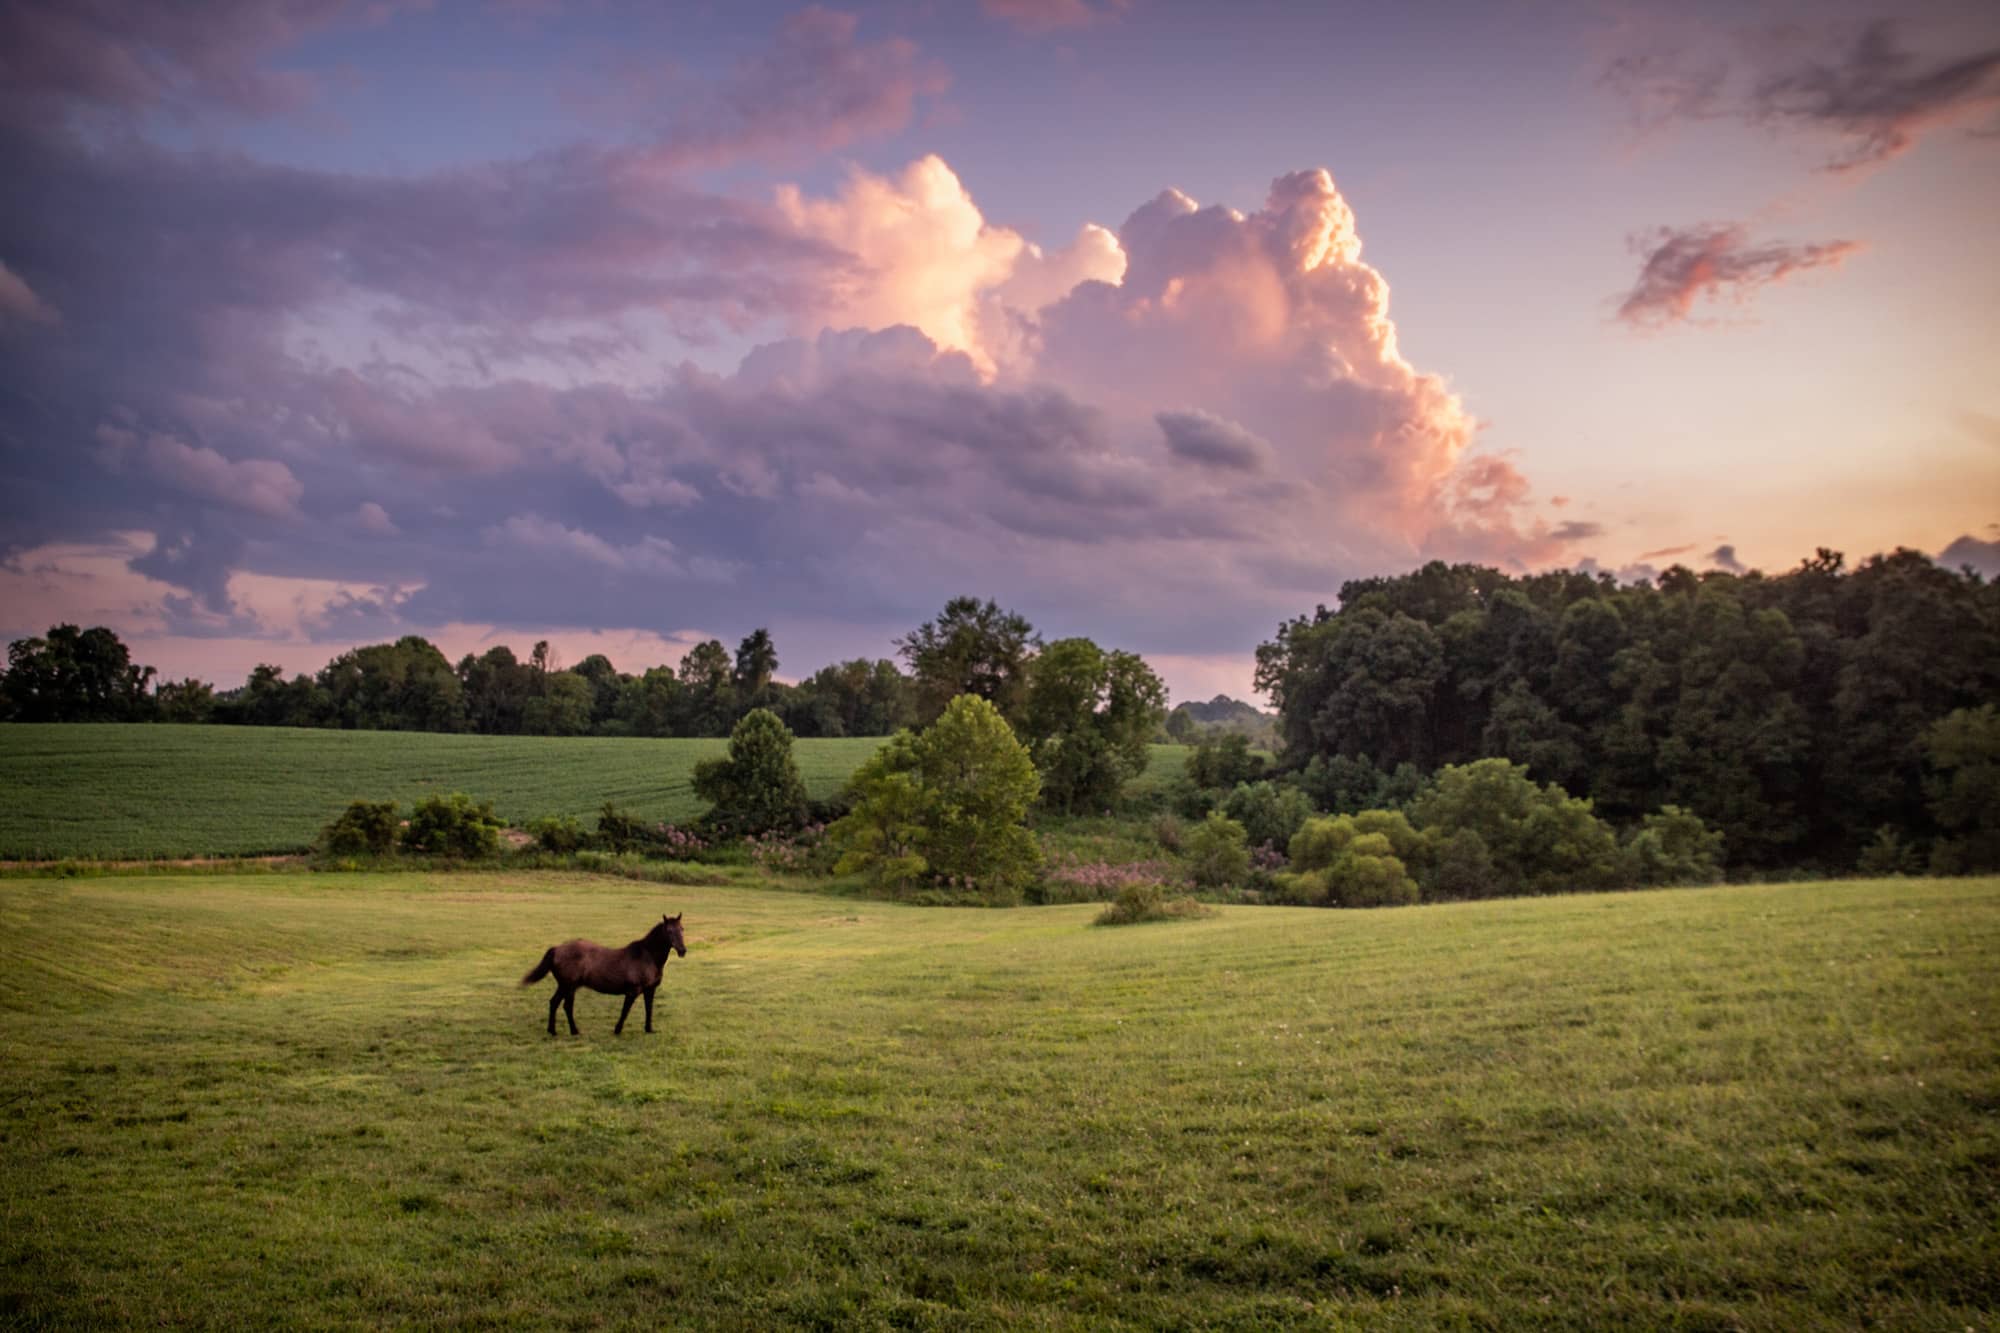 The rolling hills and beautiful skies of Athens County add to making Athens a wonderful place to live, work or visit.